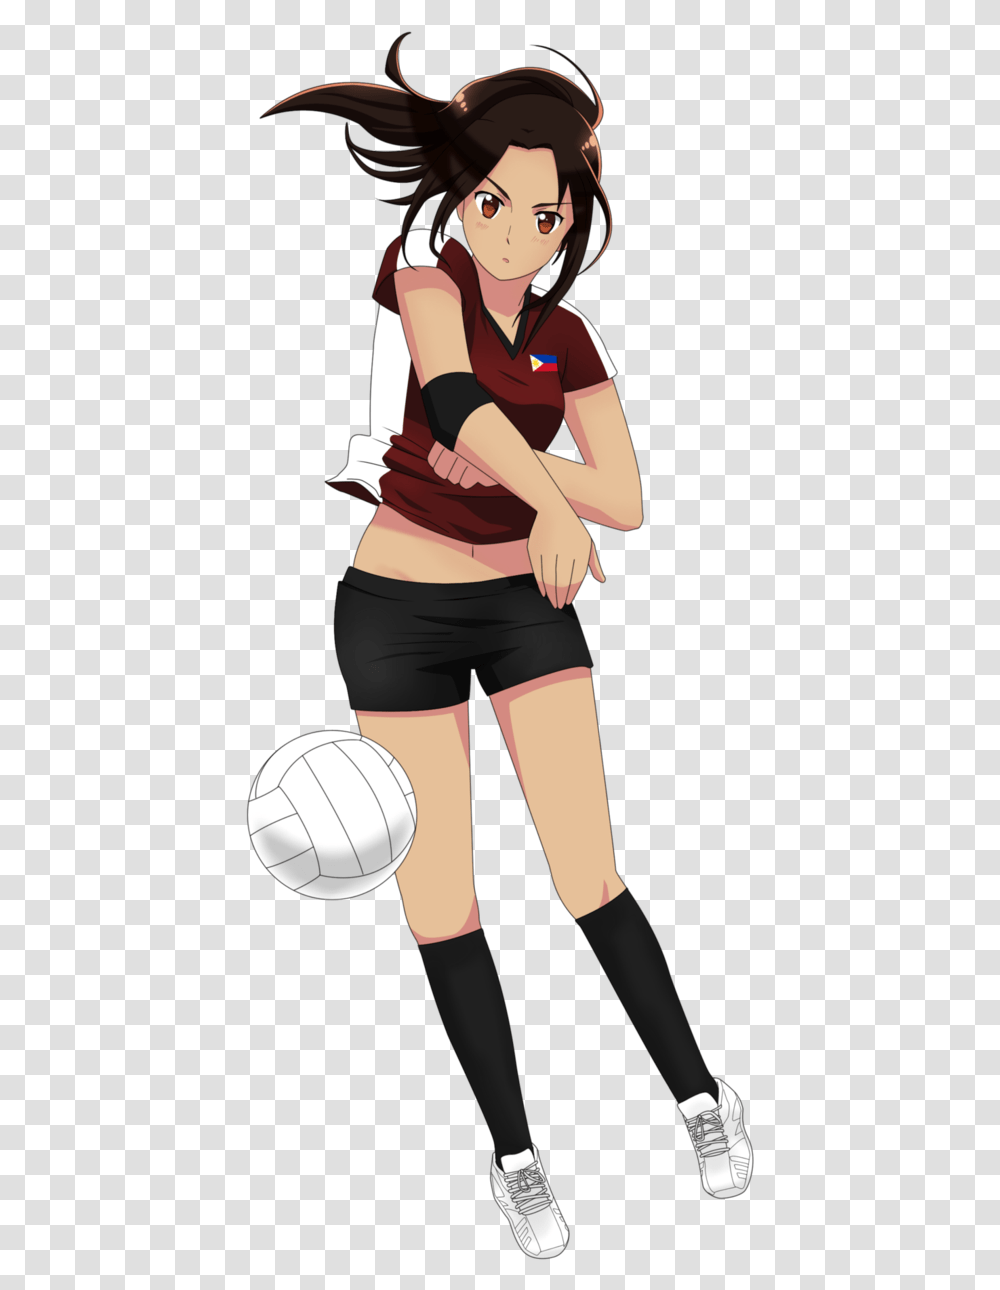 Volleyball By Exelionstar Anime Girl Playing Volleyball Sport Volleyball Anime Girl, Person, Shorts, Clothing, People Transparent Png